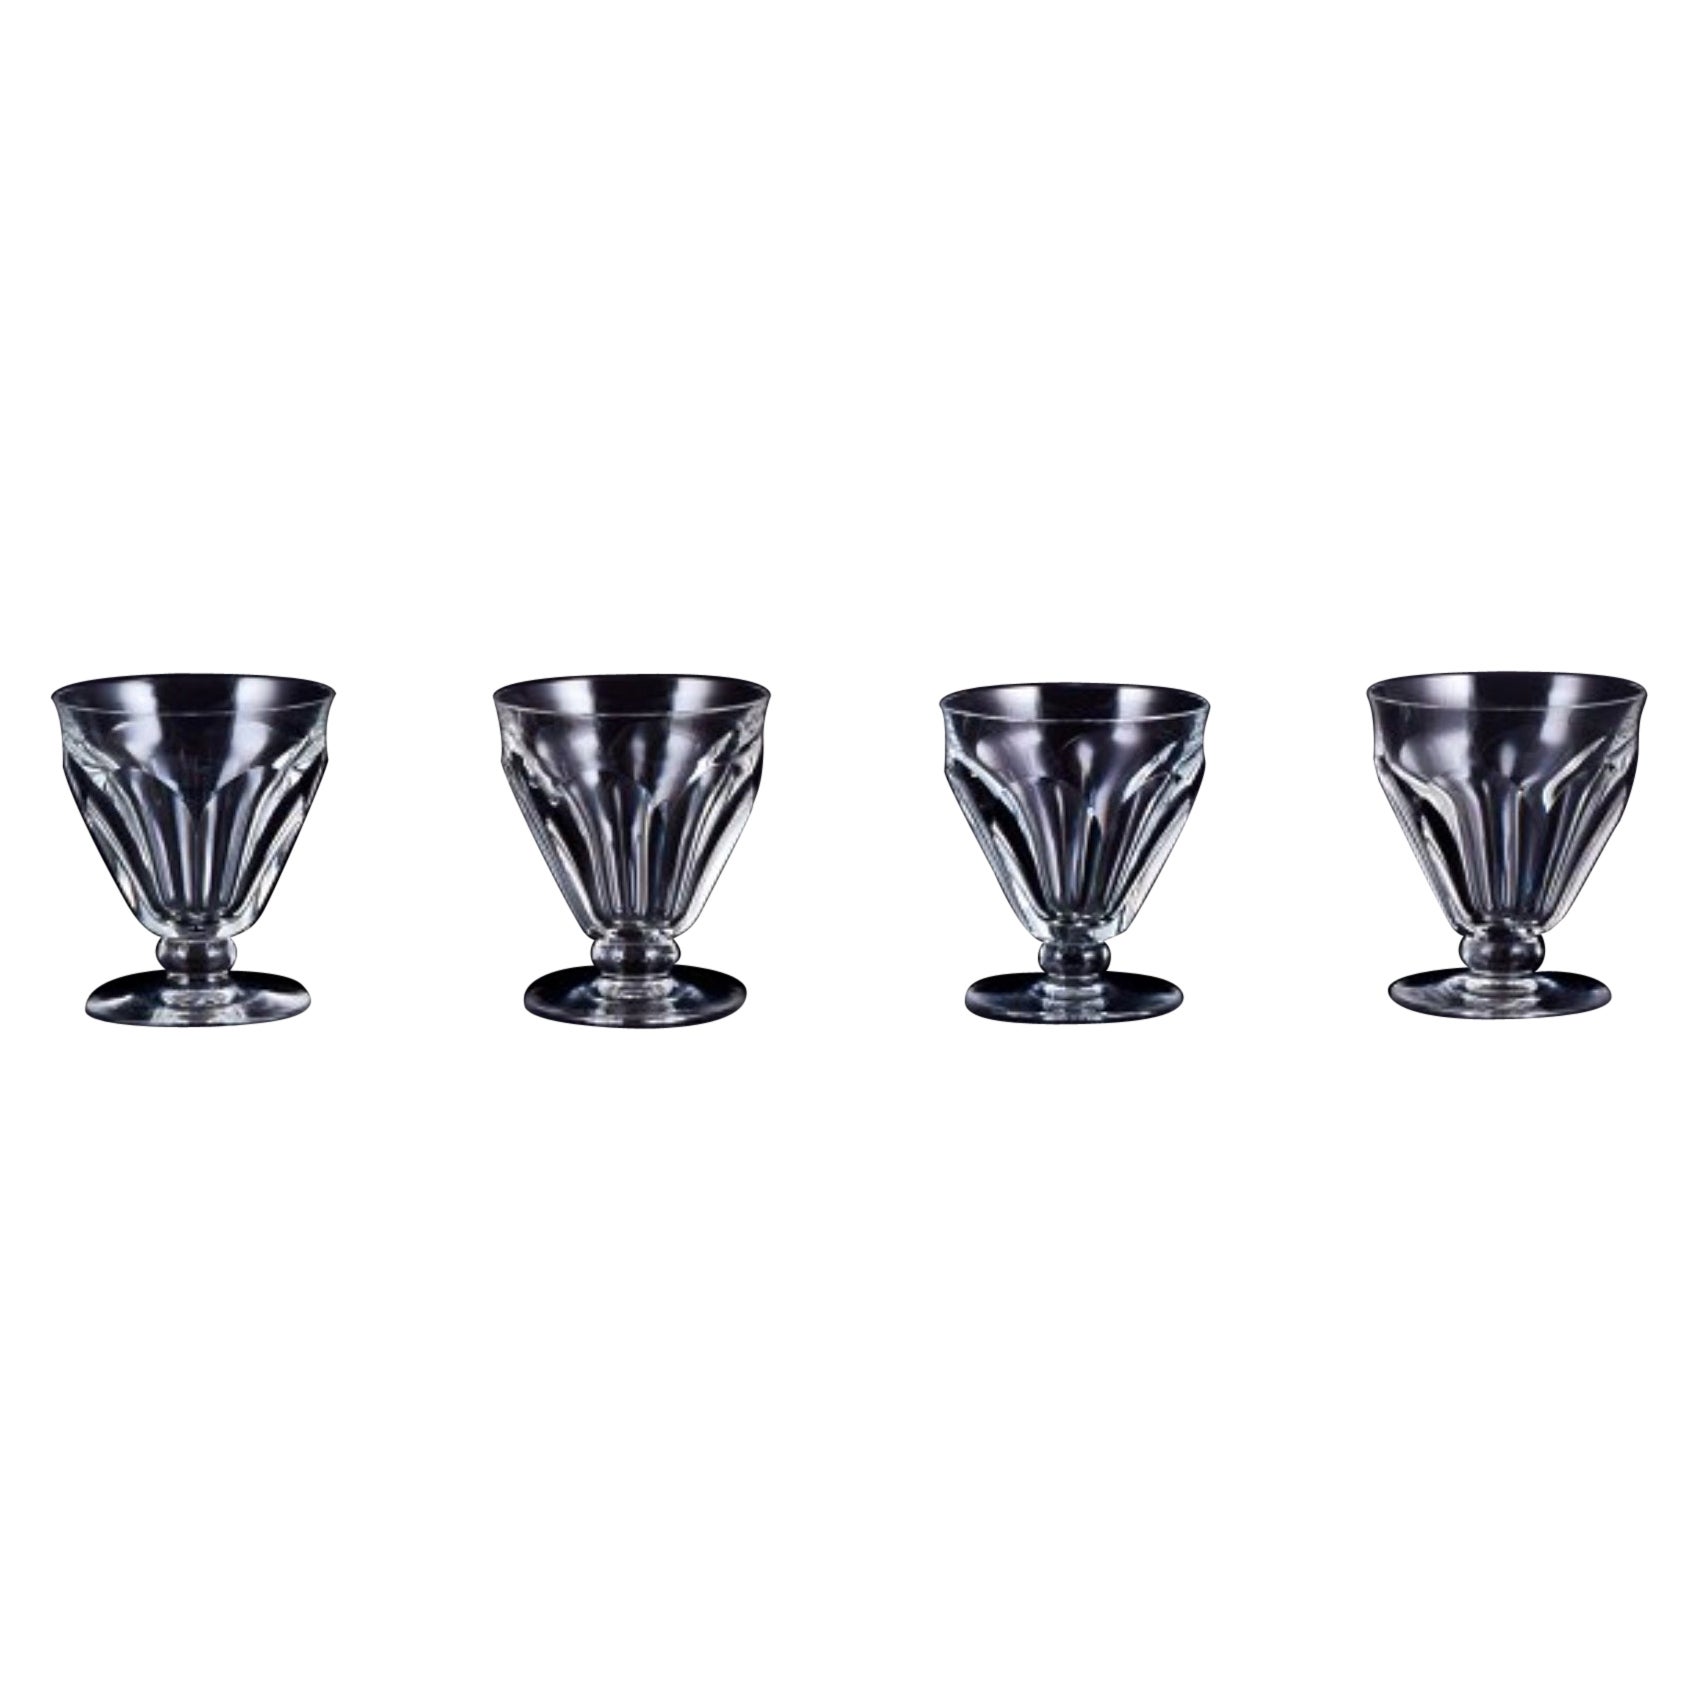 Baccarat, France. Set of four Art Deco red wine glasses in crystal glass